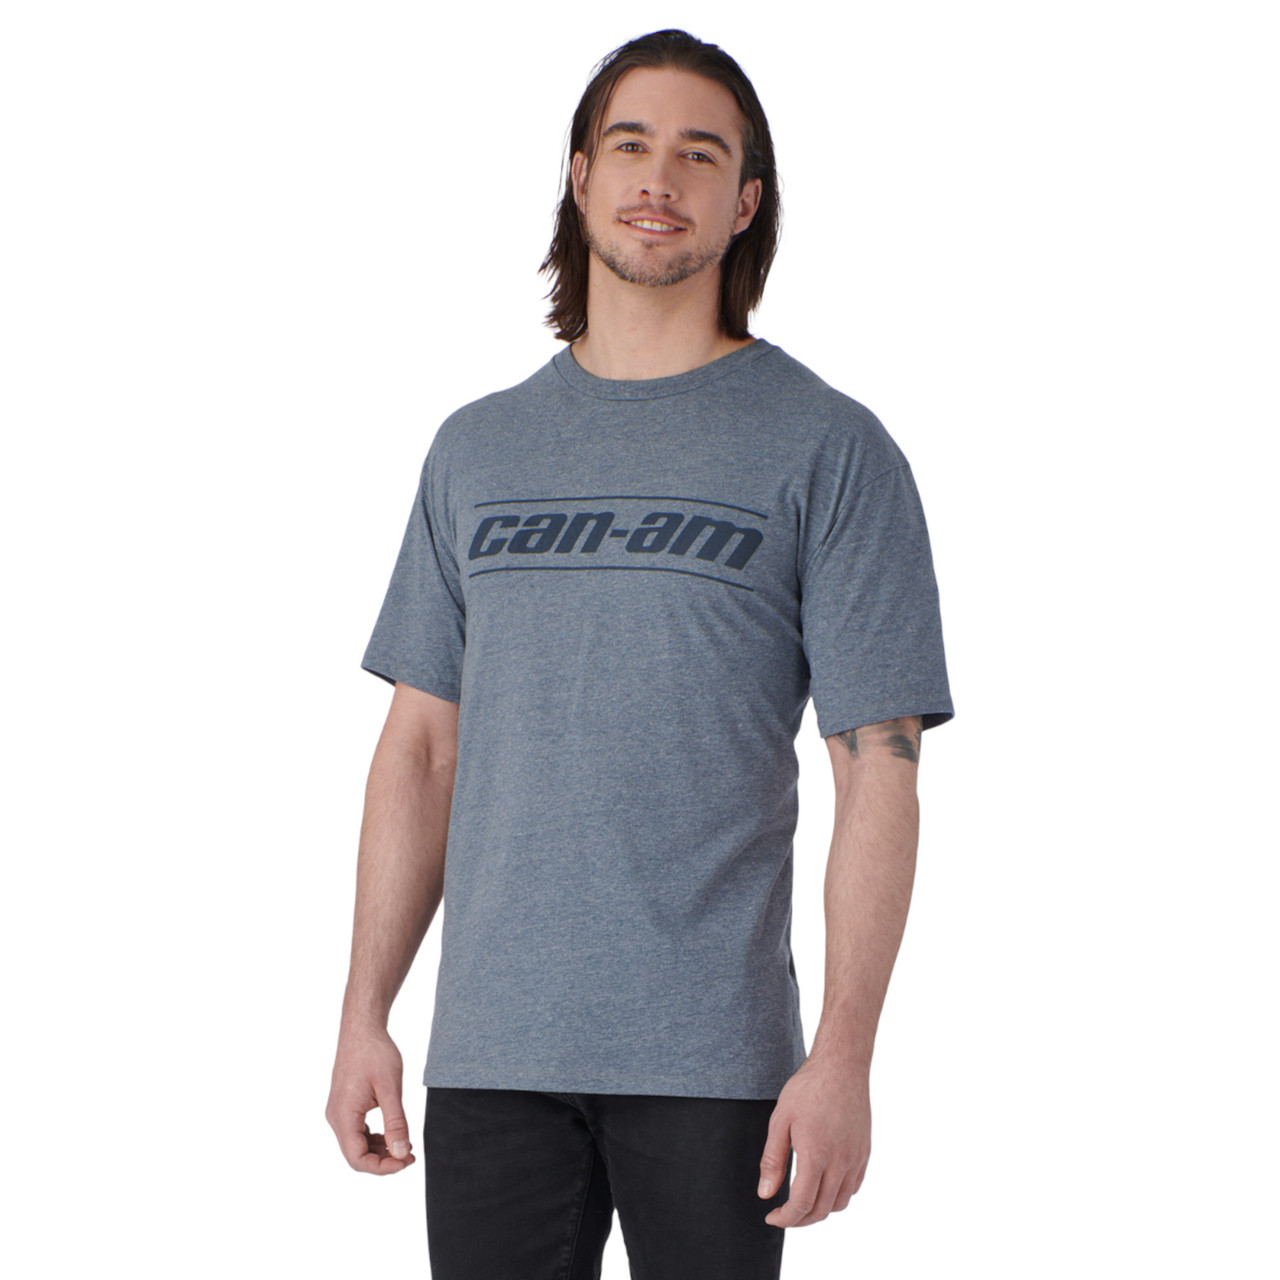 Can-Am New OEM, Men's Extra Small Cotton Signature Branded T-Shirt, 4547540229